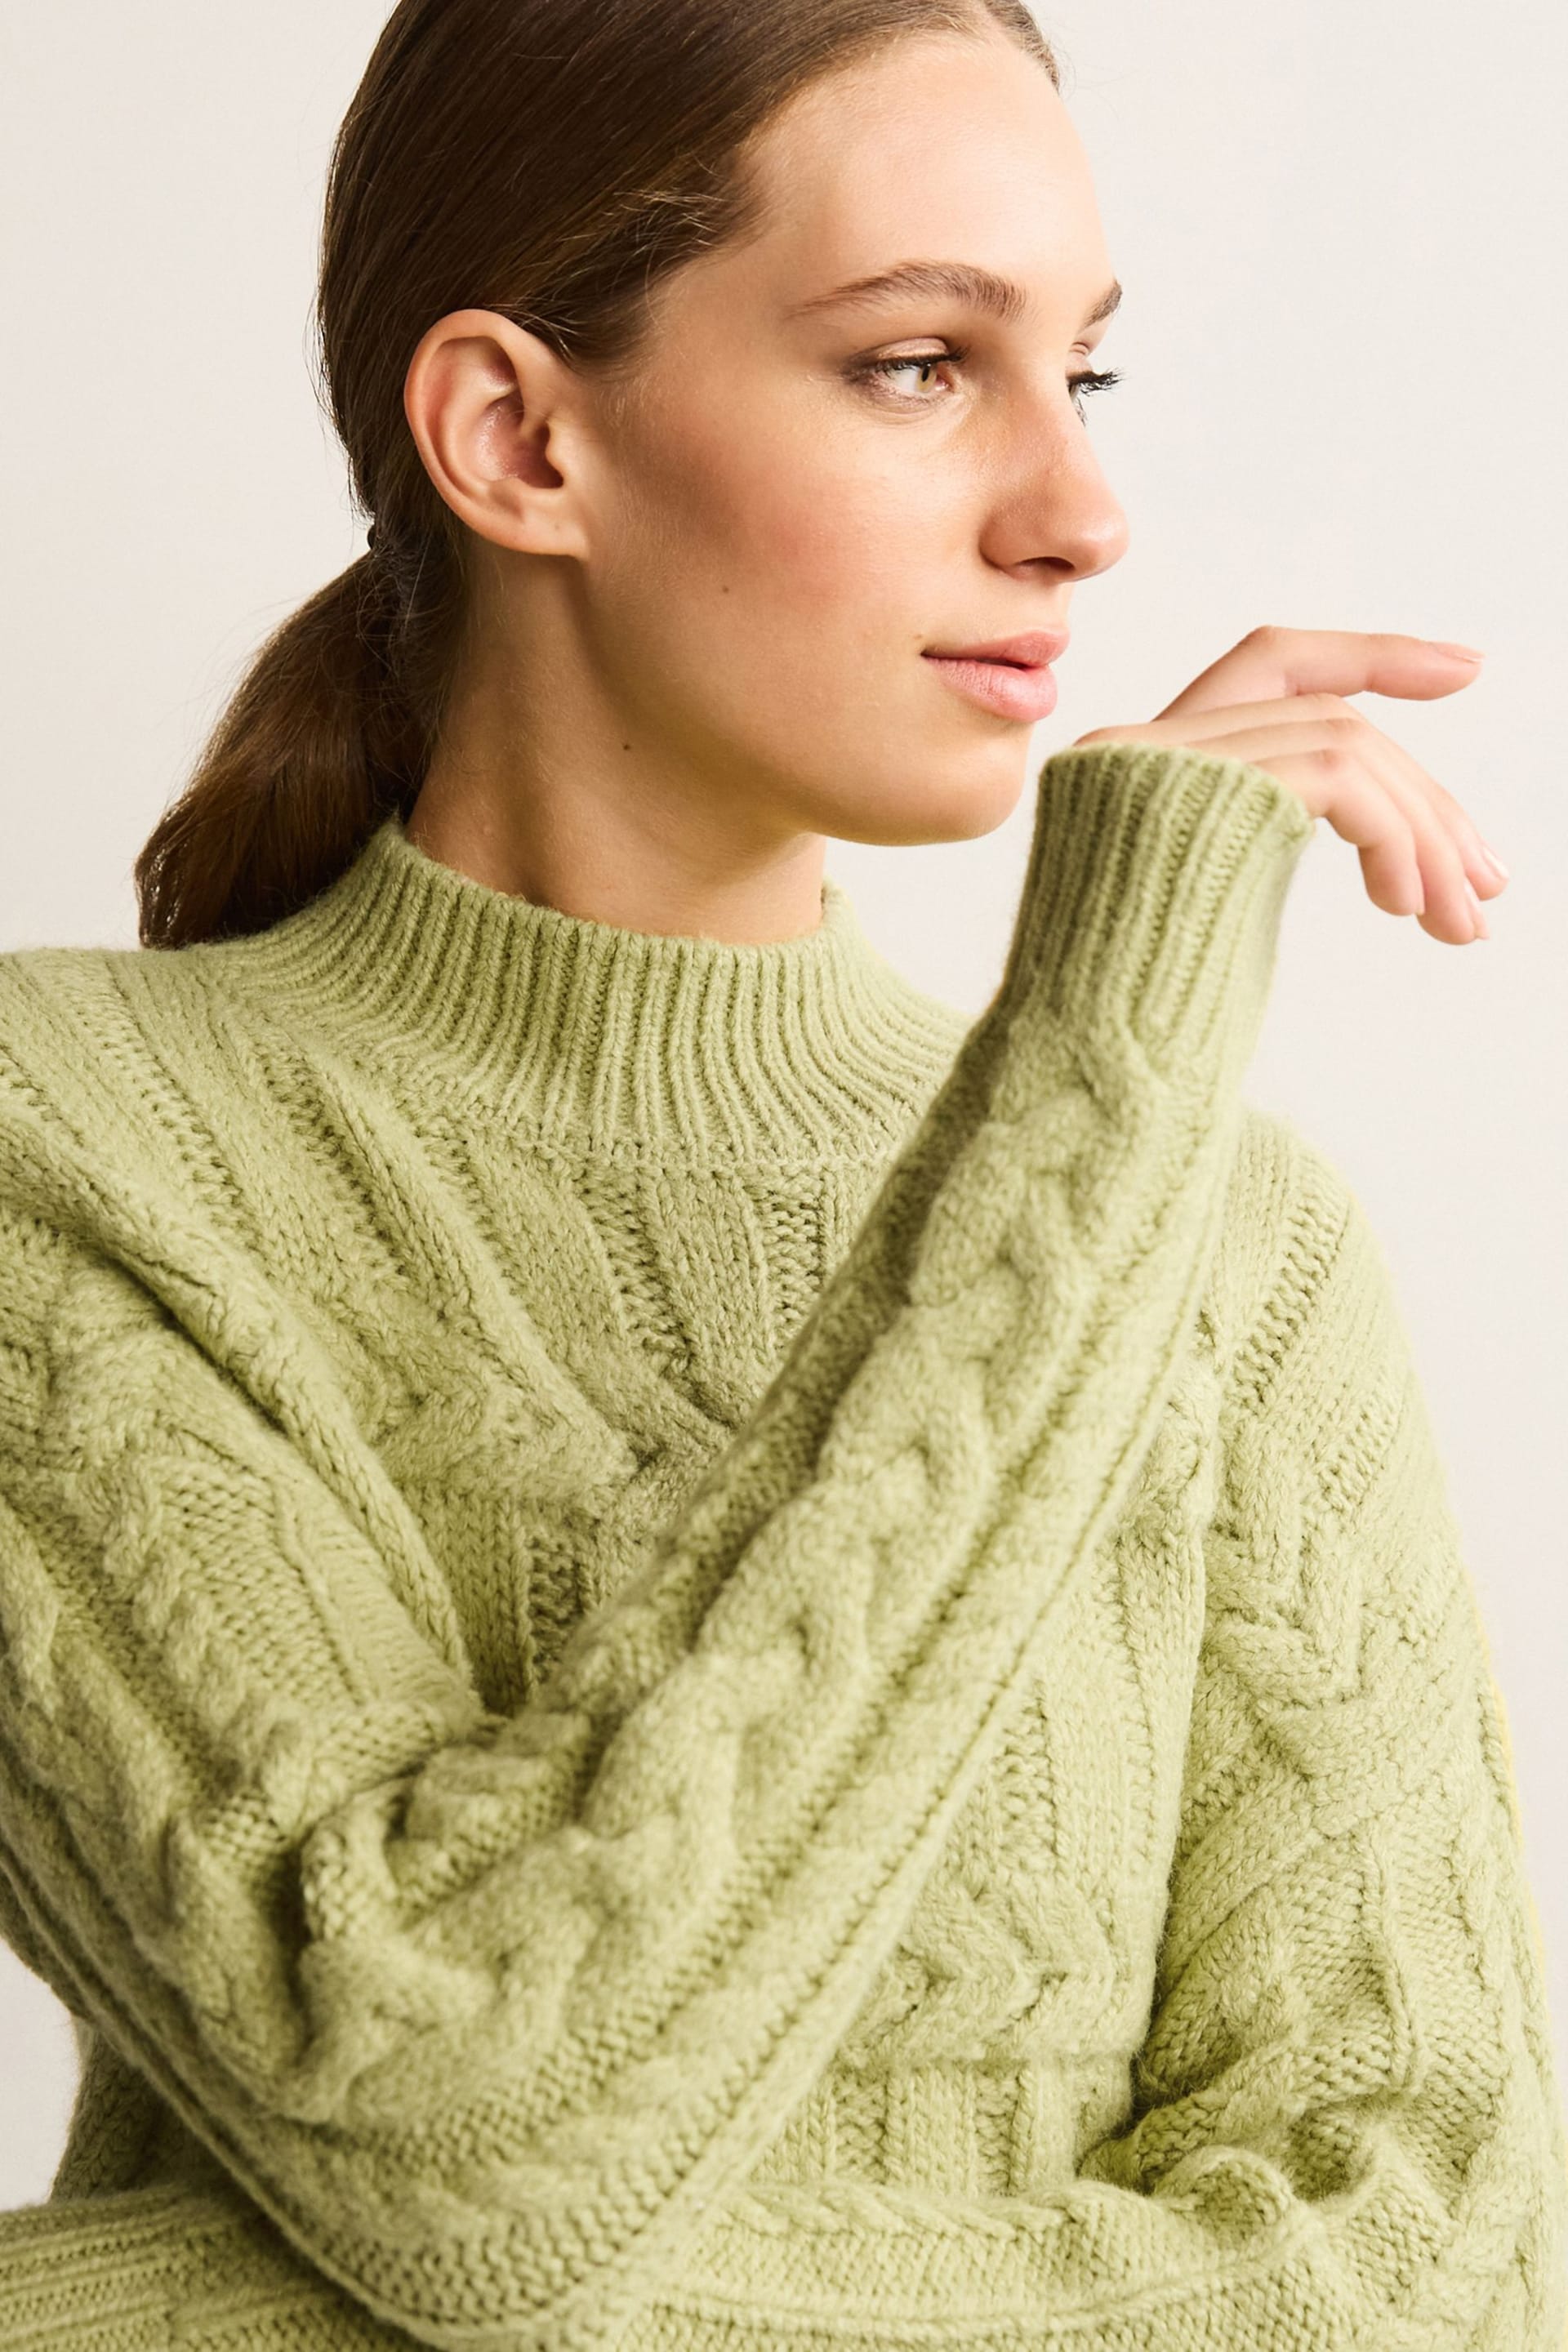 Green Cable Detail High Neck Jumper - Image 4 of 6